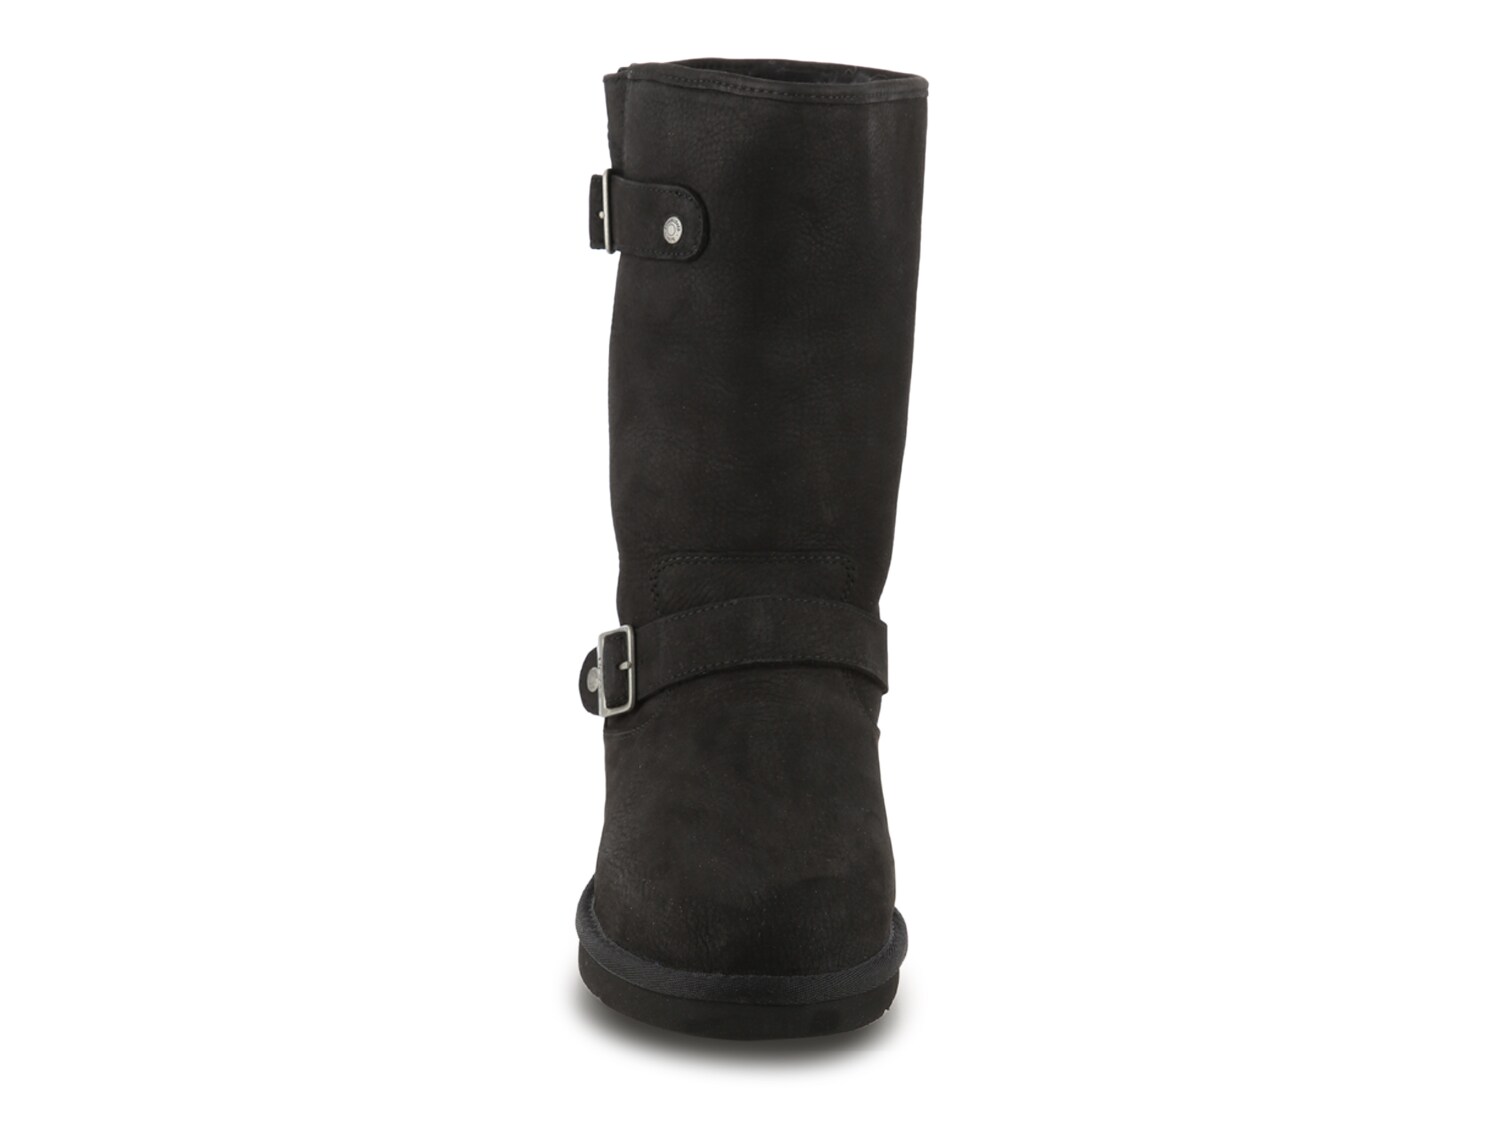 ladies ugg sutter boots